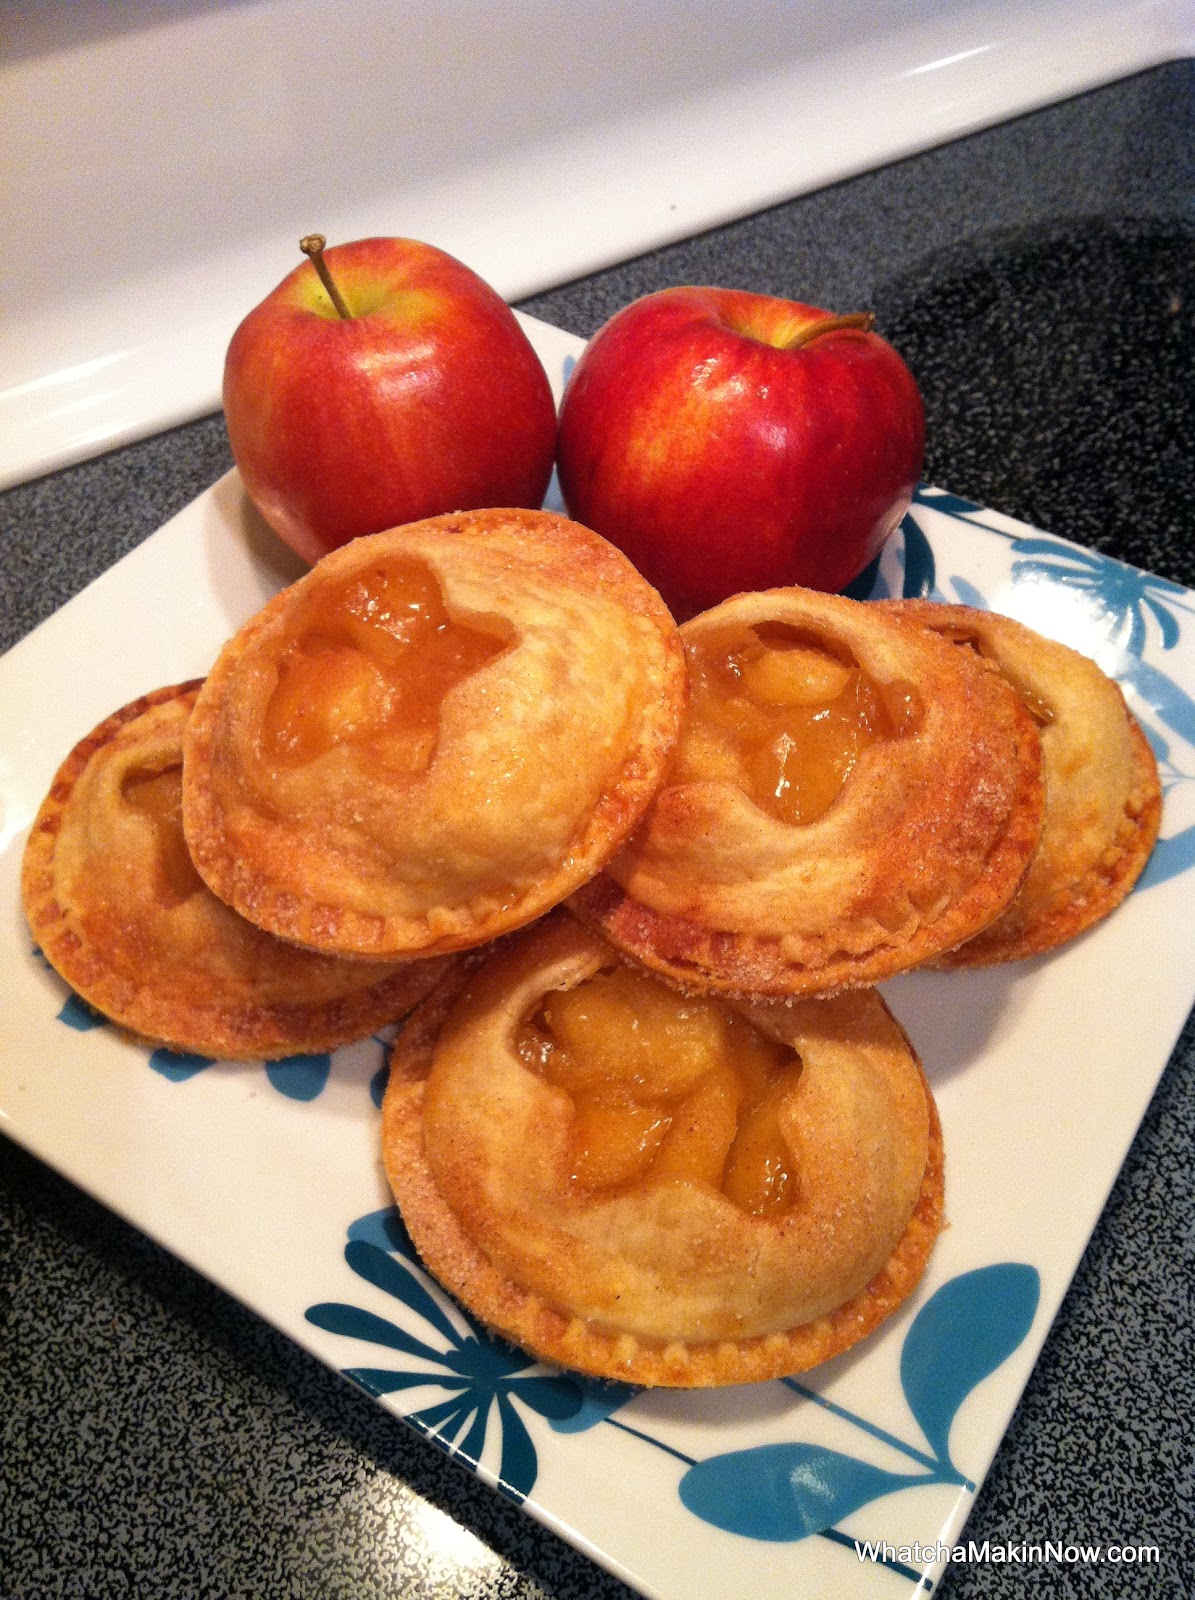 Whatcha Makin' Now?: Mini Apple Pies and a Giveaway